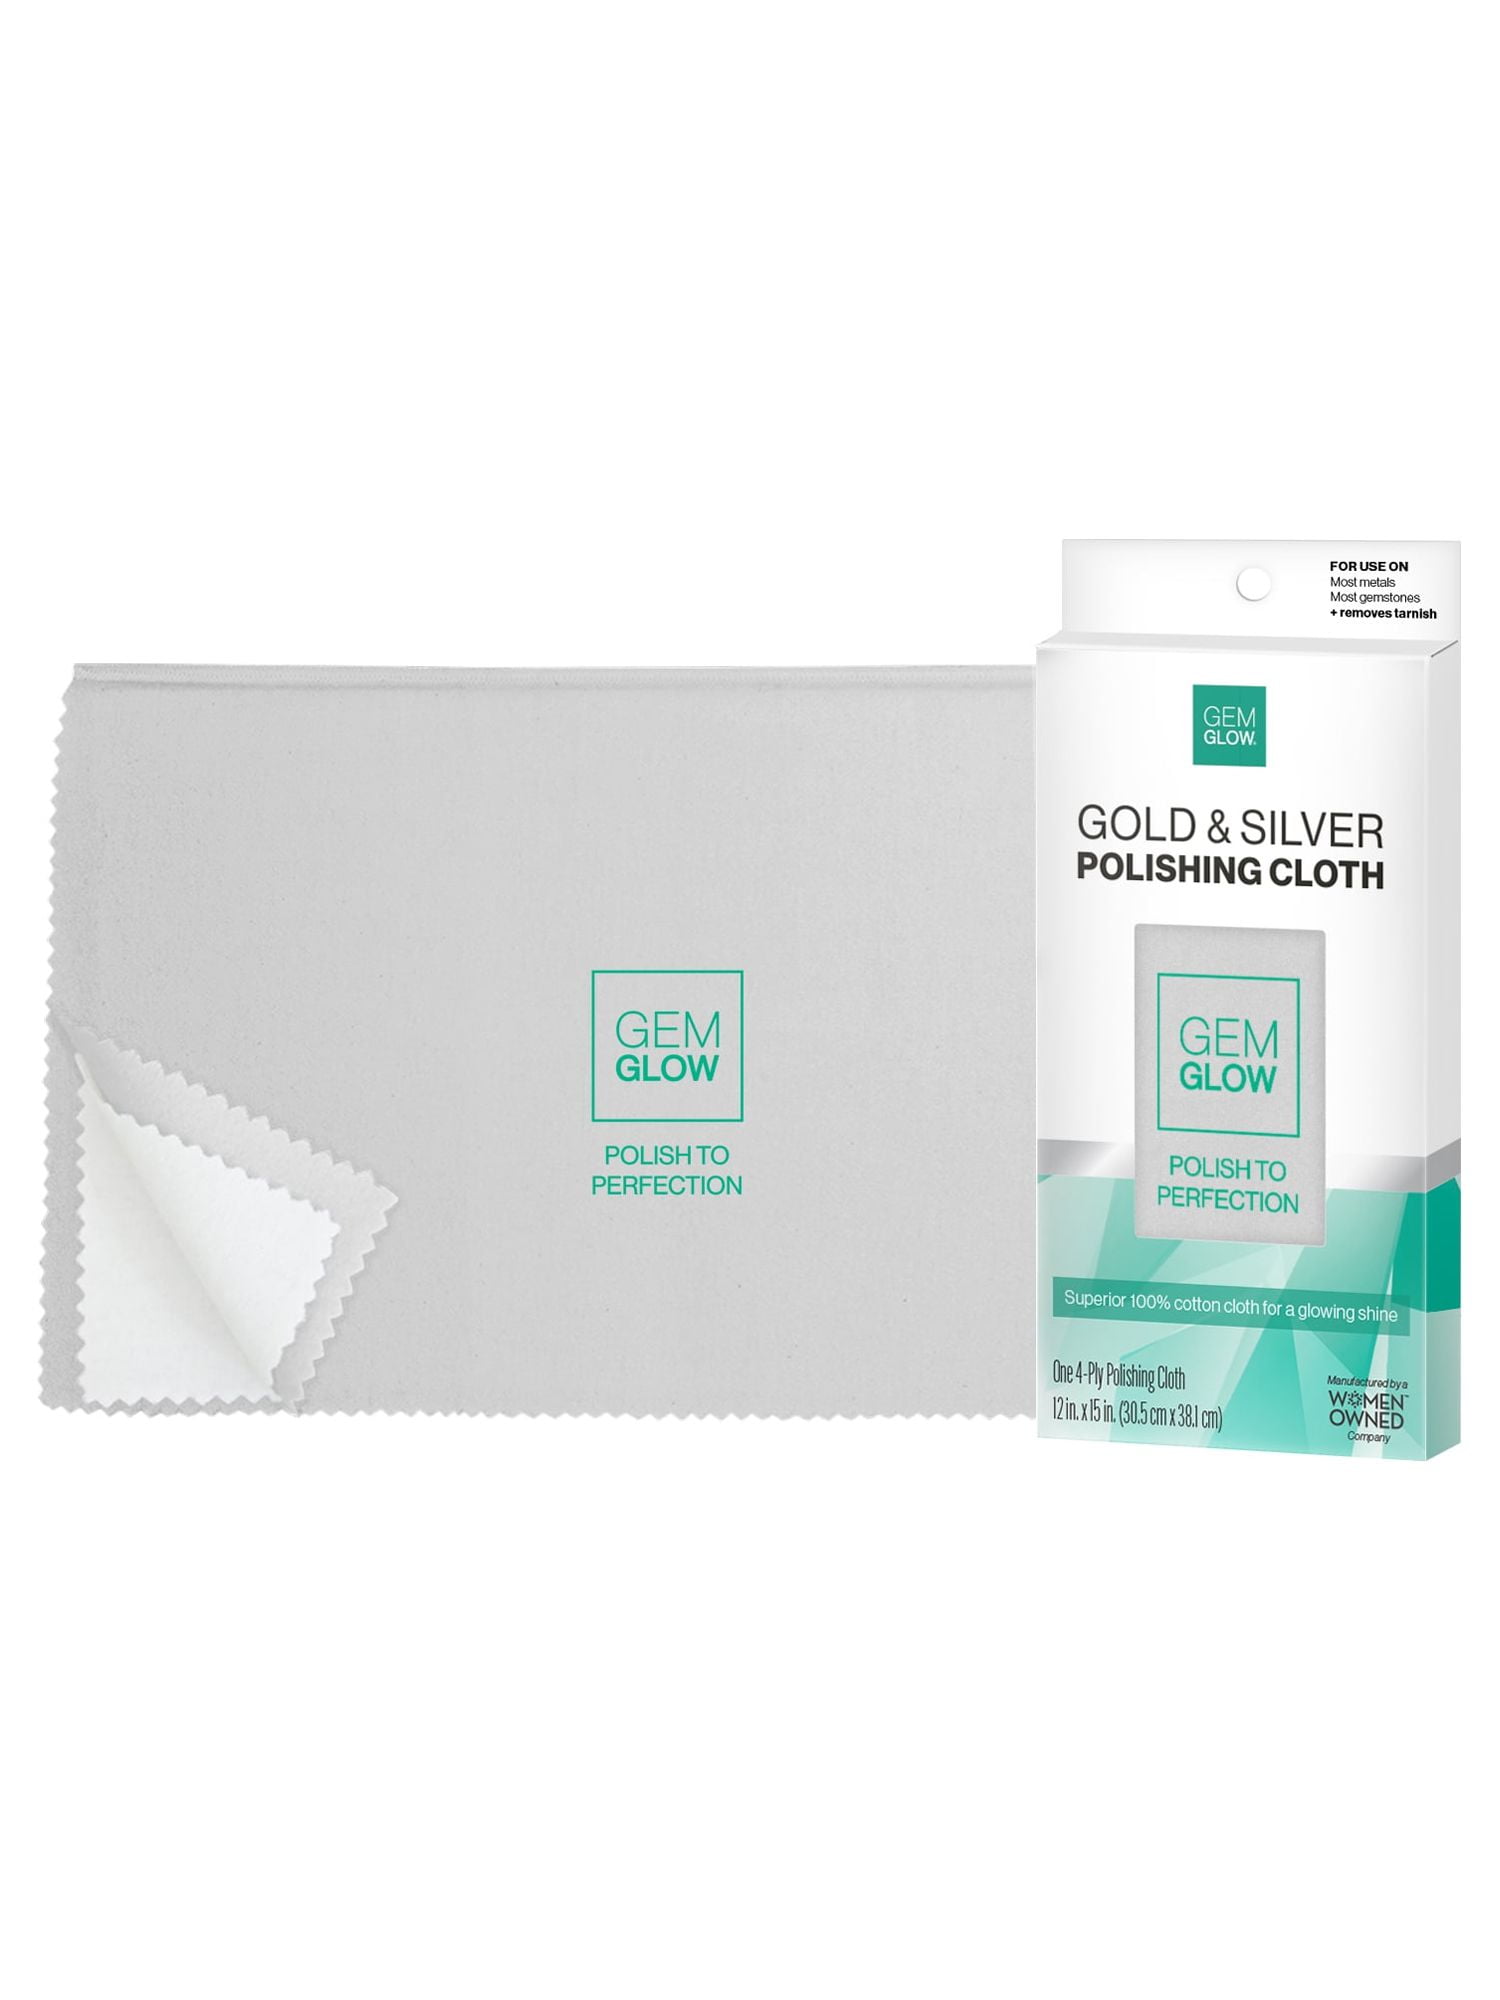 Pro Size Set of 2 Polishing Cloths 11 x 14 inches for Silver, Gold